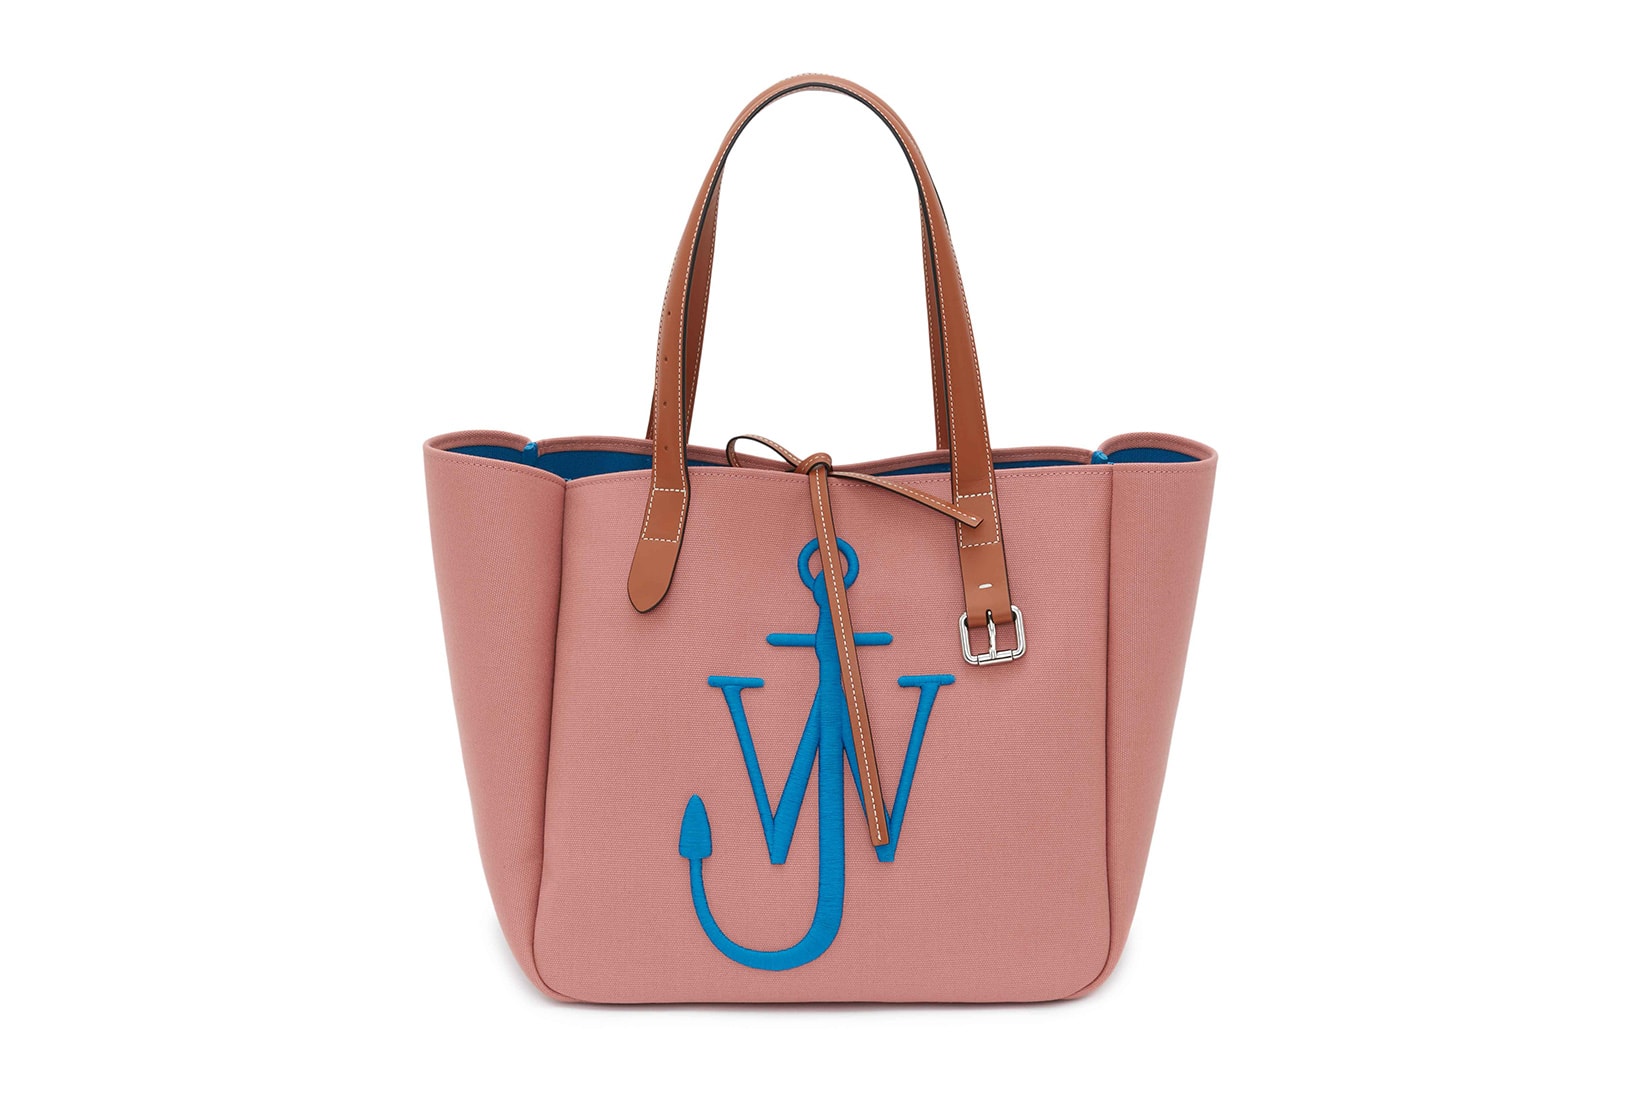 jw anderson eco-conscious belt tote bags sustainable canvas anchor logo pink blue black